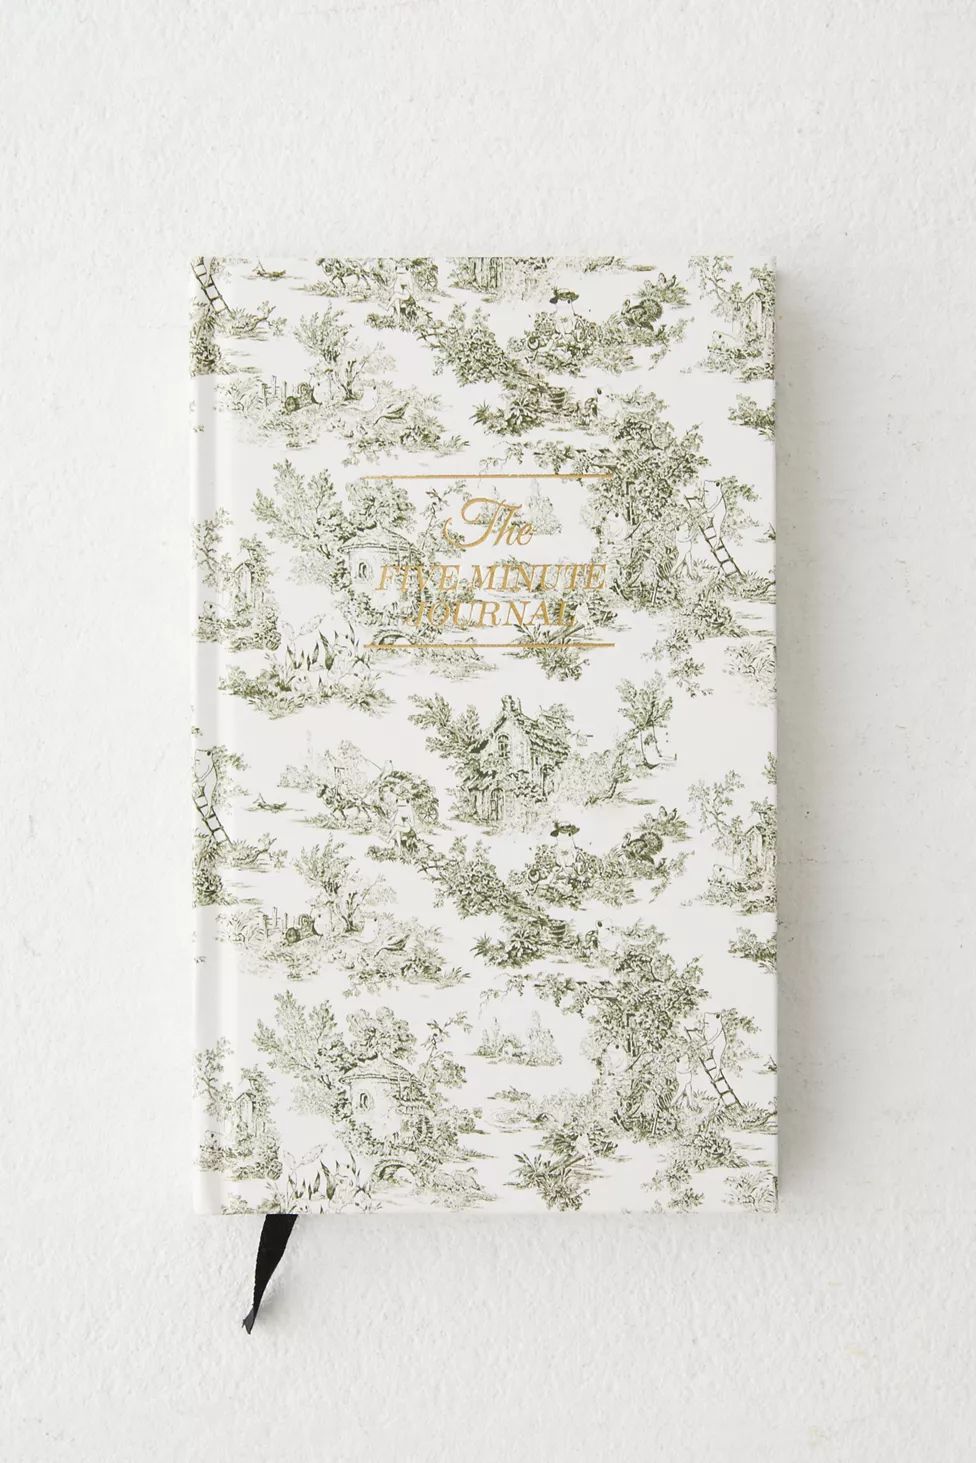 The UO Exclusive Five-Minute Journal By Intelligent Change | Urban Outfitters (US and RoW)